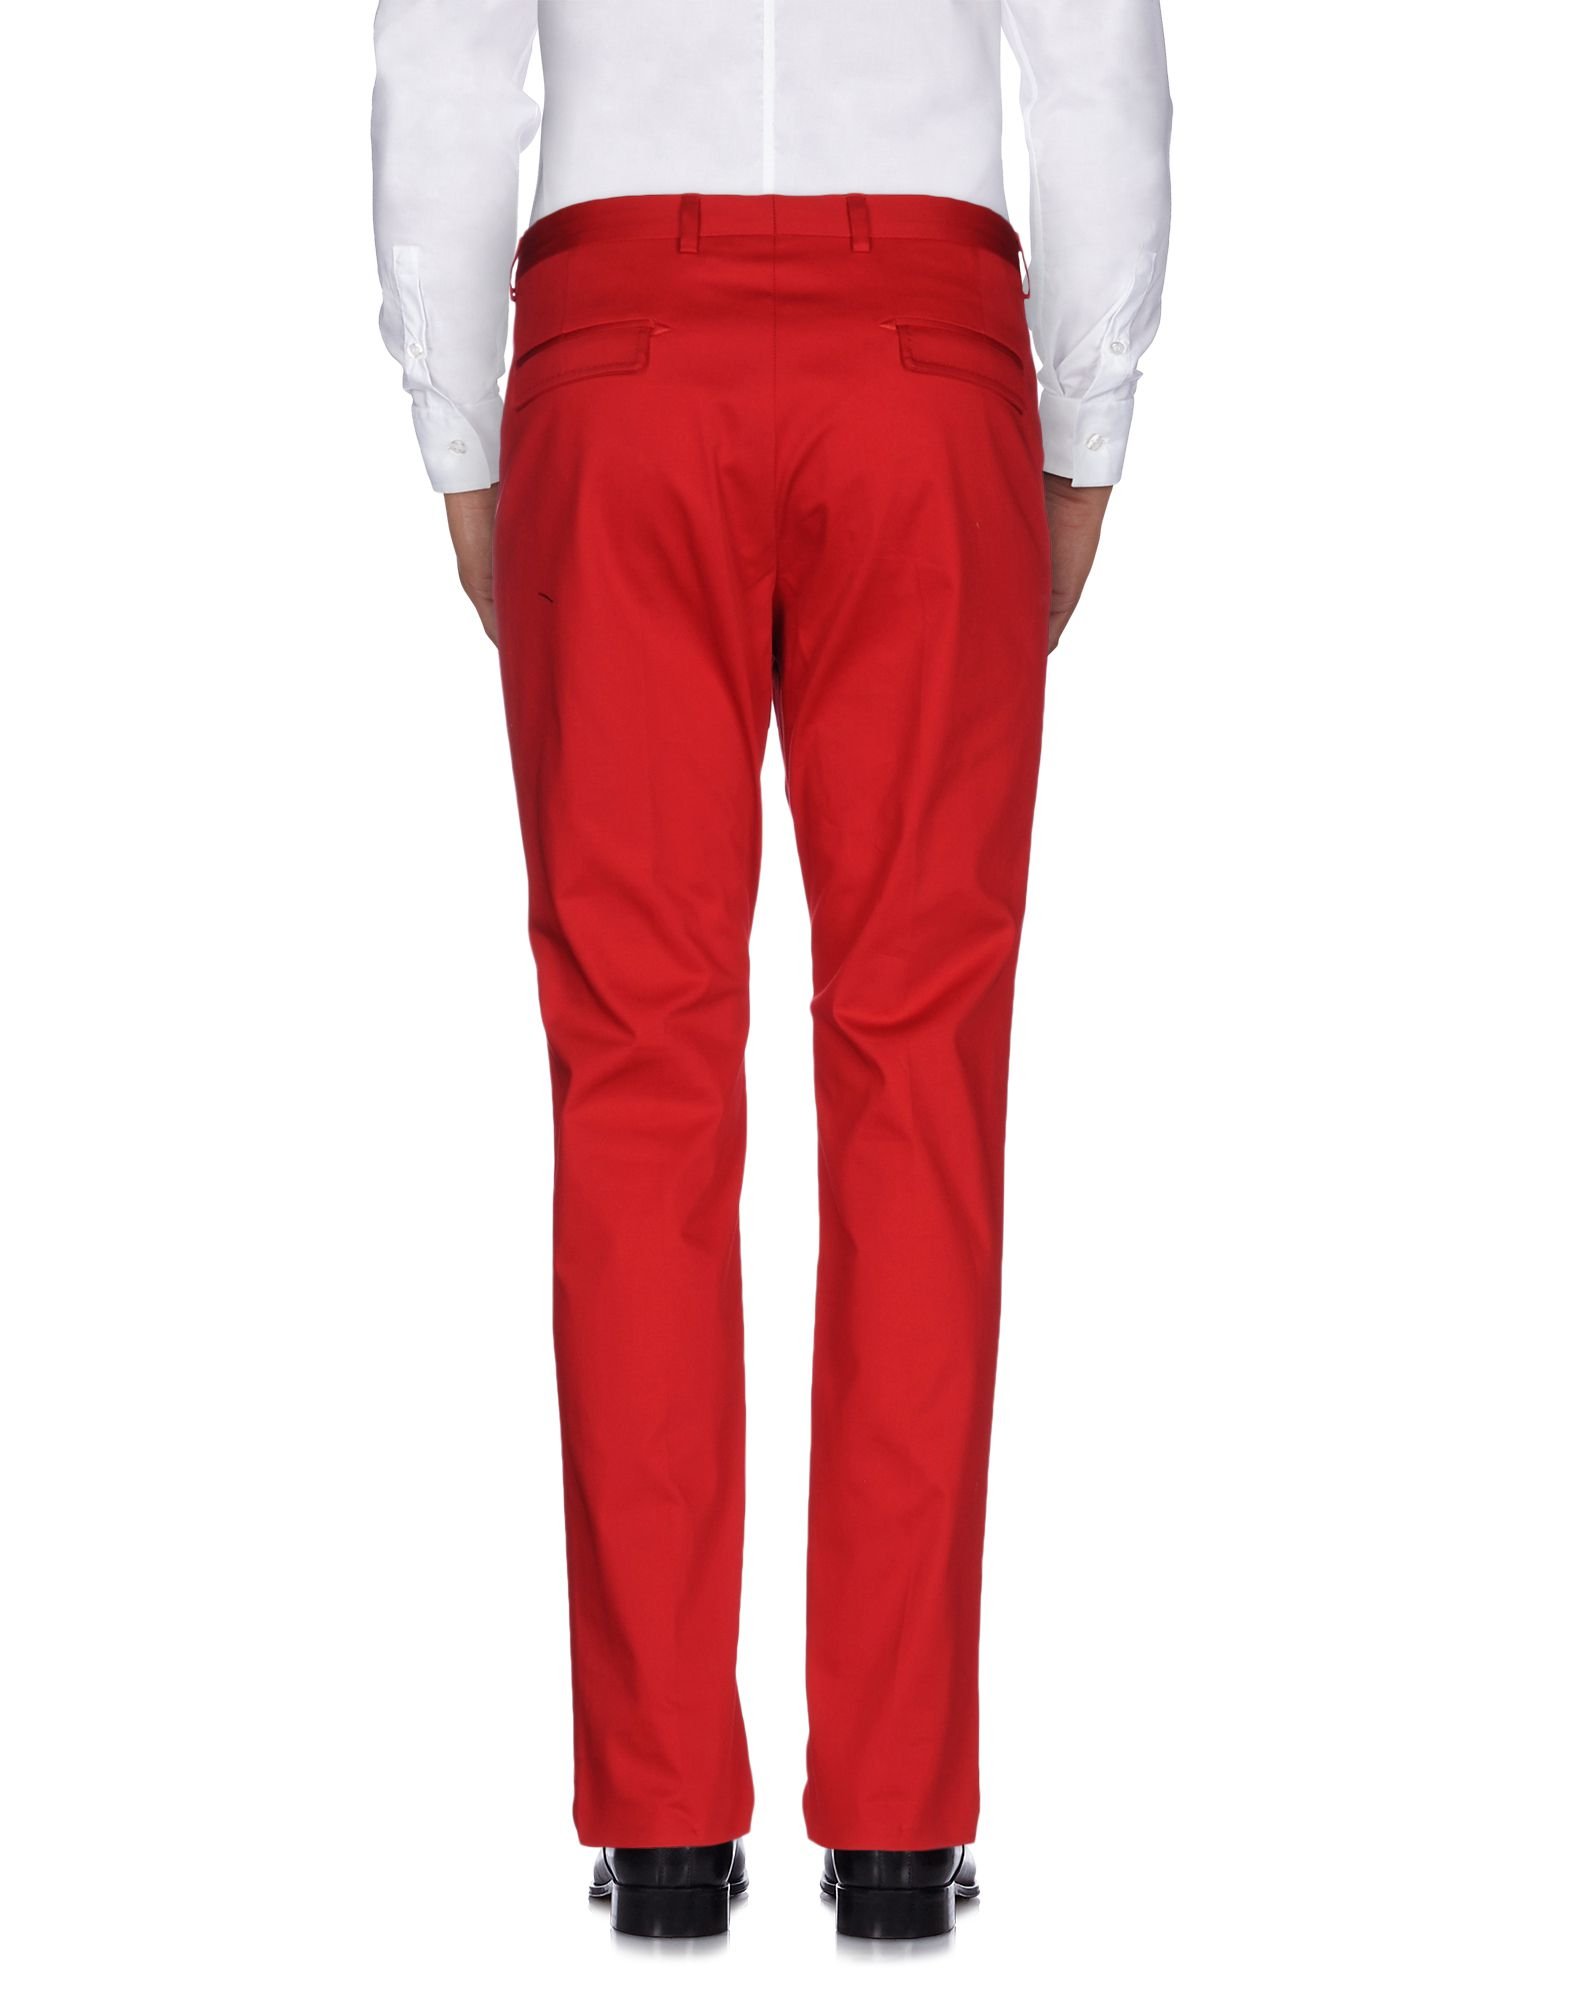 Lyst - Gucci Casual Trouser in Red for Men